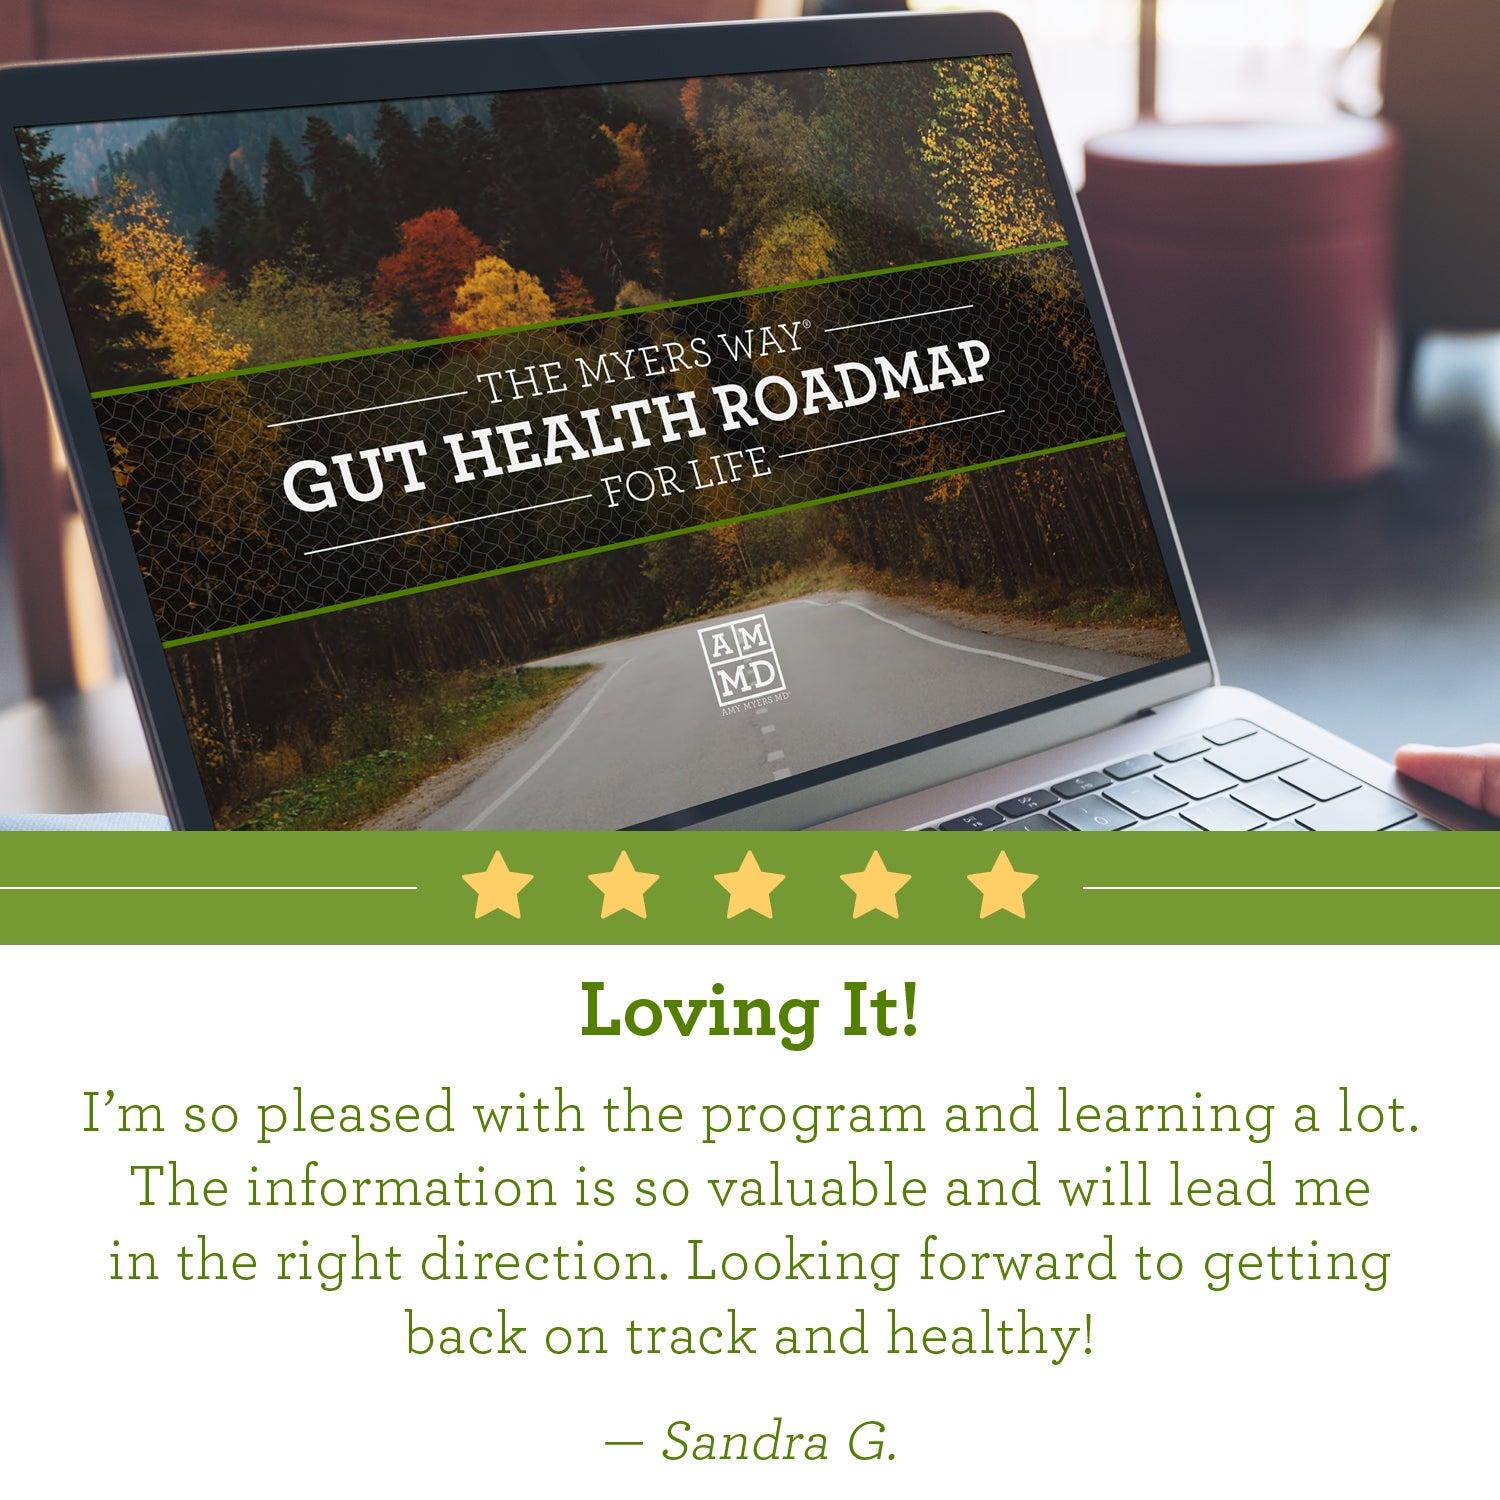 Product review: "Loving it! I'm so pleased with the program and learning a lot. The information is so valuable and will lead me in the right direction. Looking forward to getting back on track and healthy!" Sandra G.